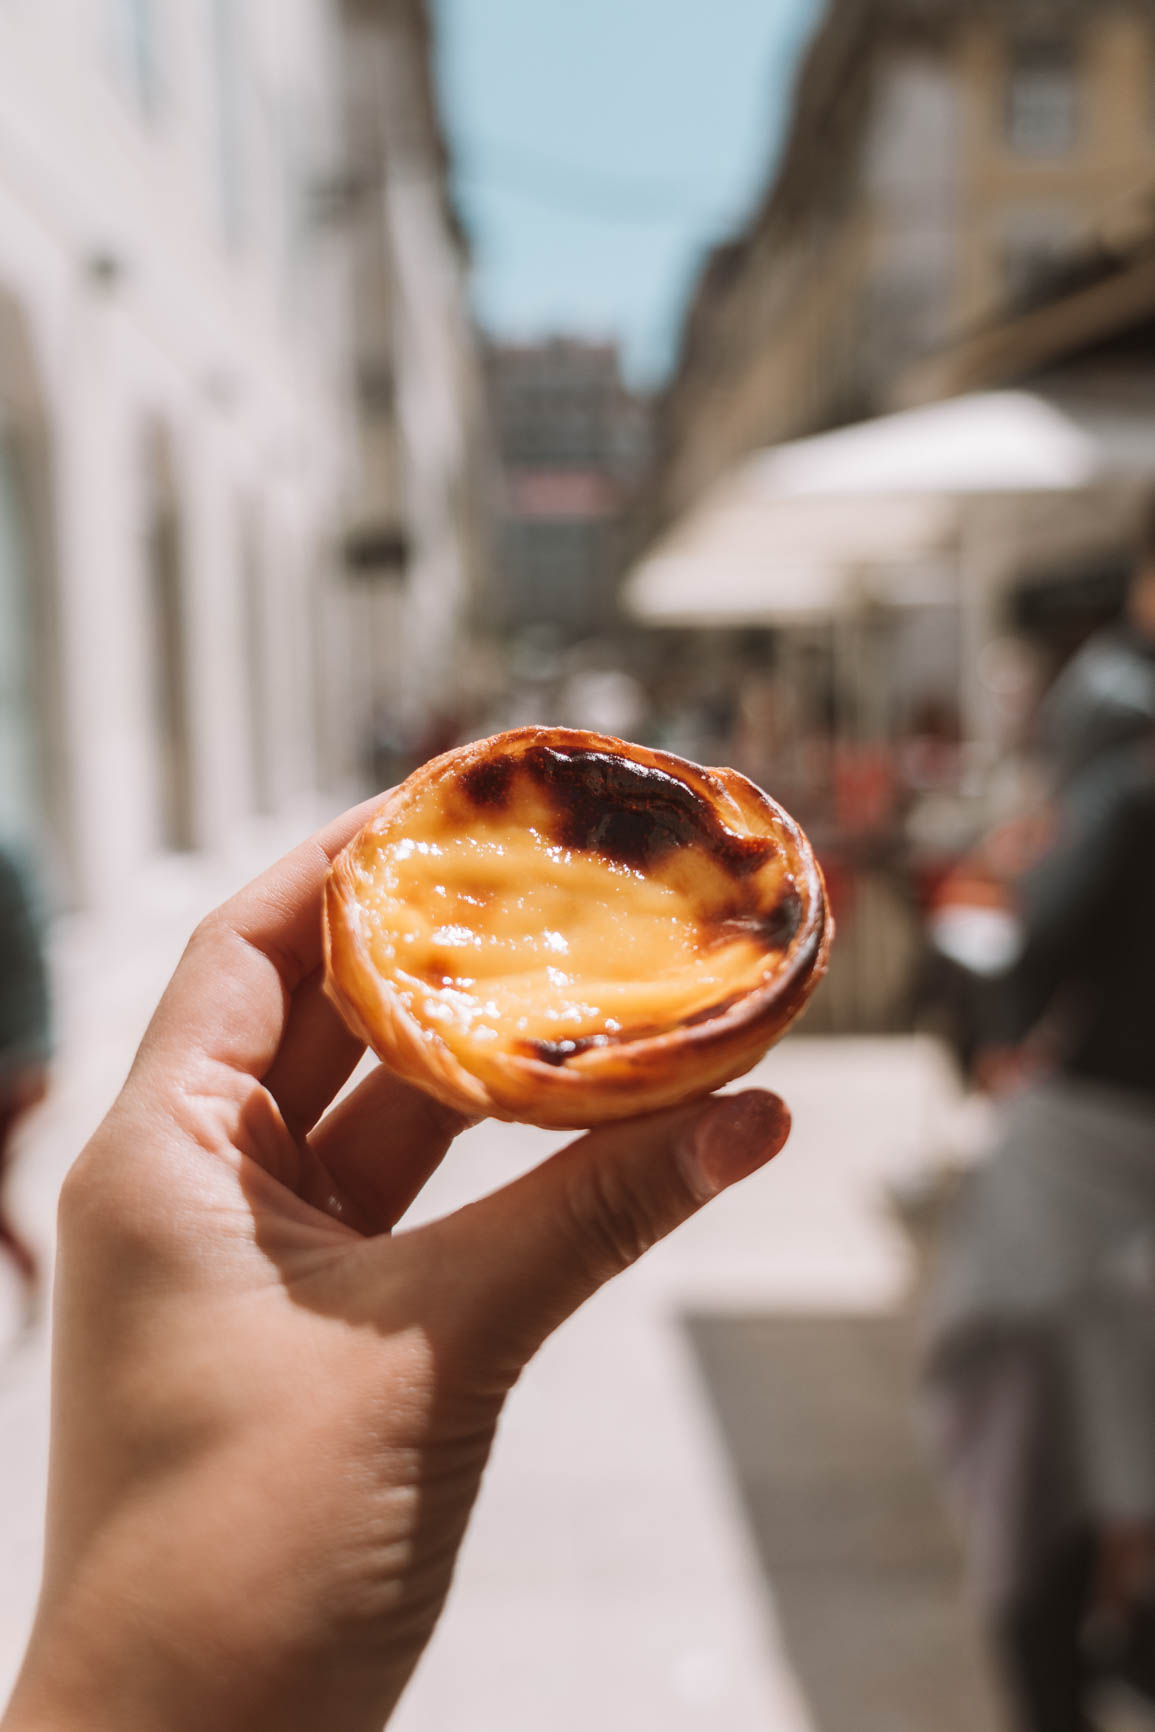 Portugal Food guide: Portuguese Traditional Dishes You Need To Try